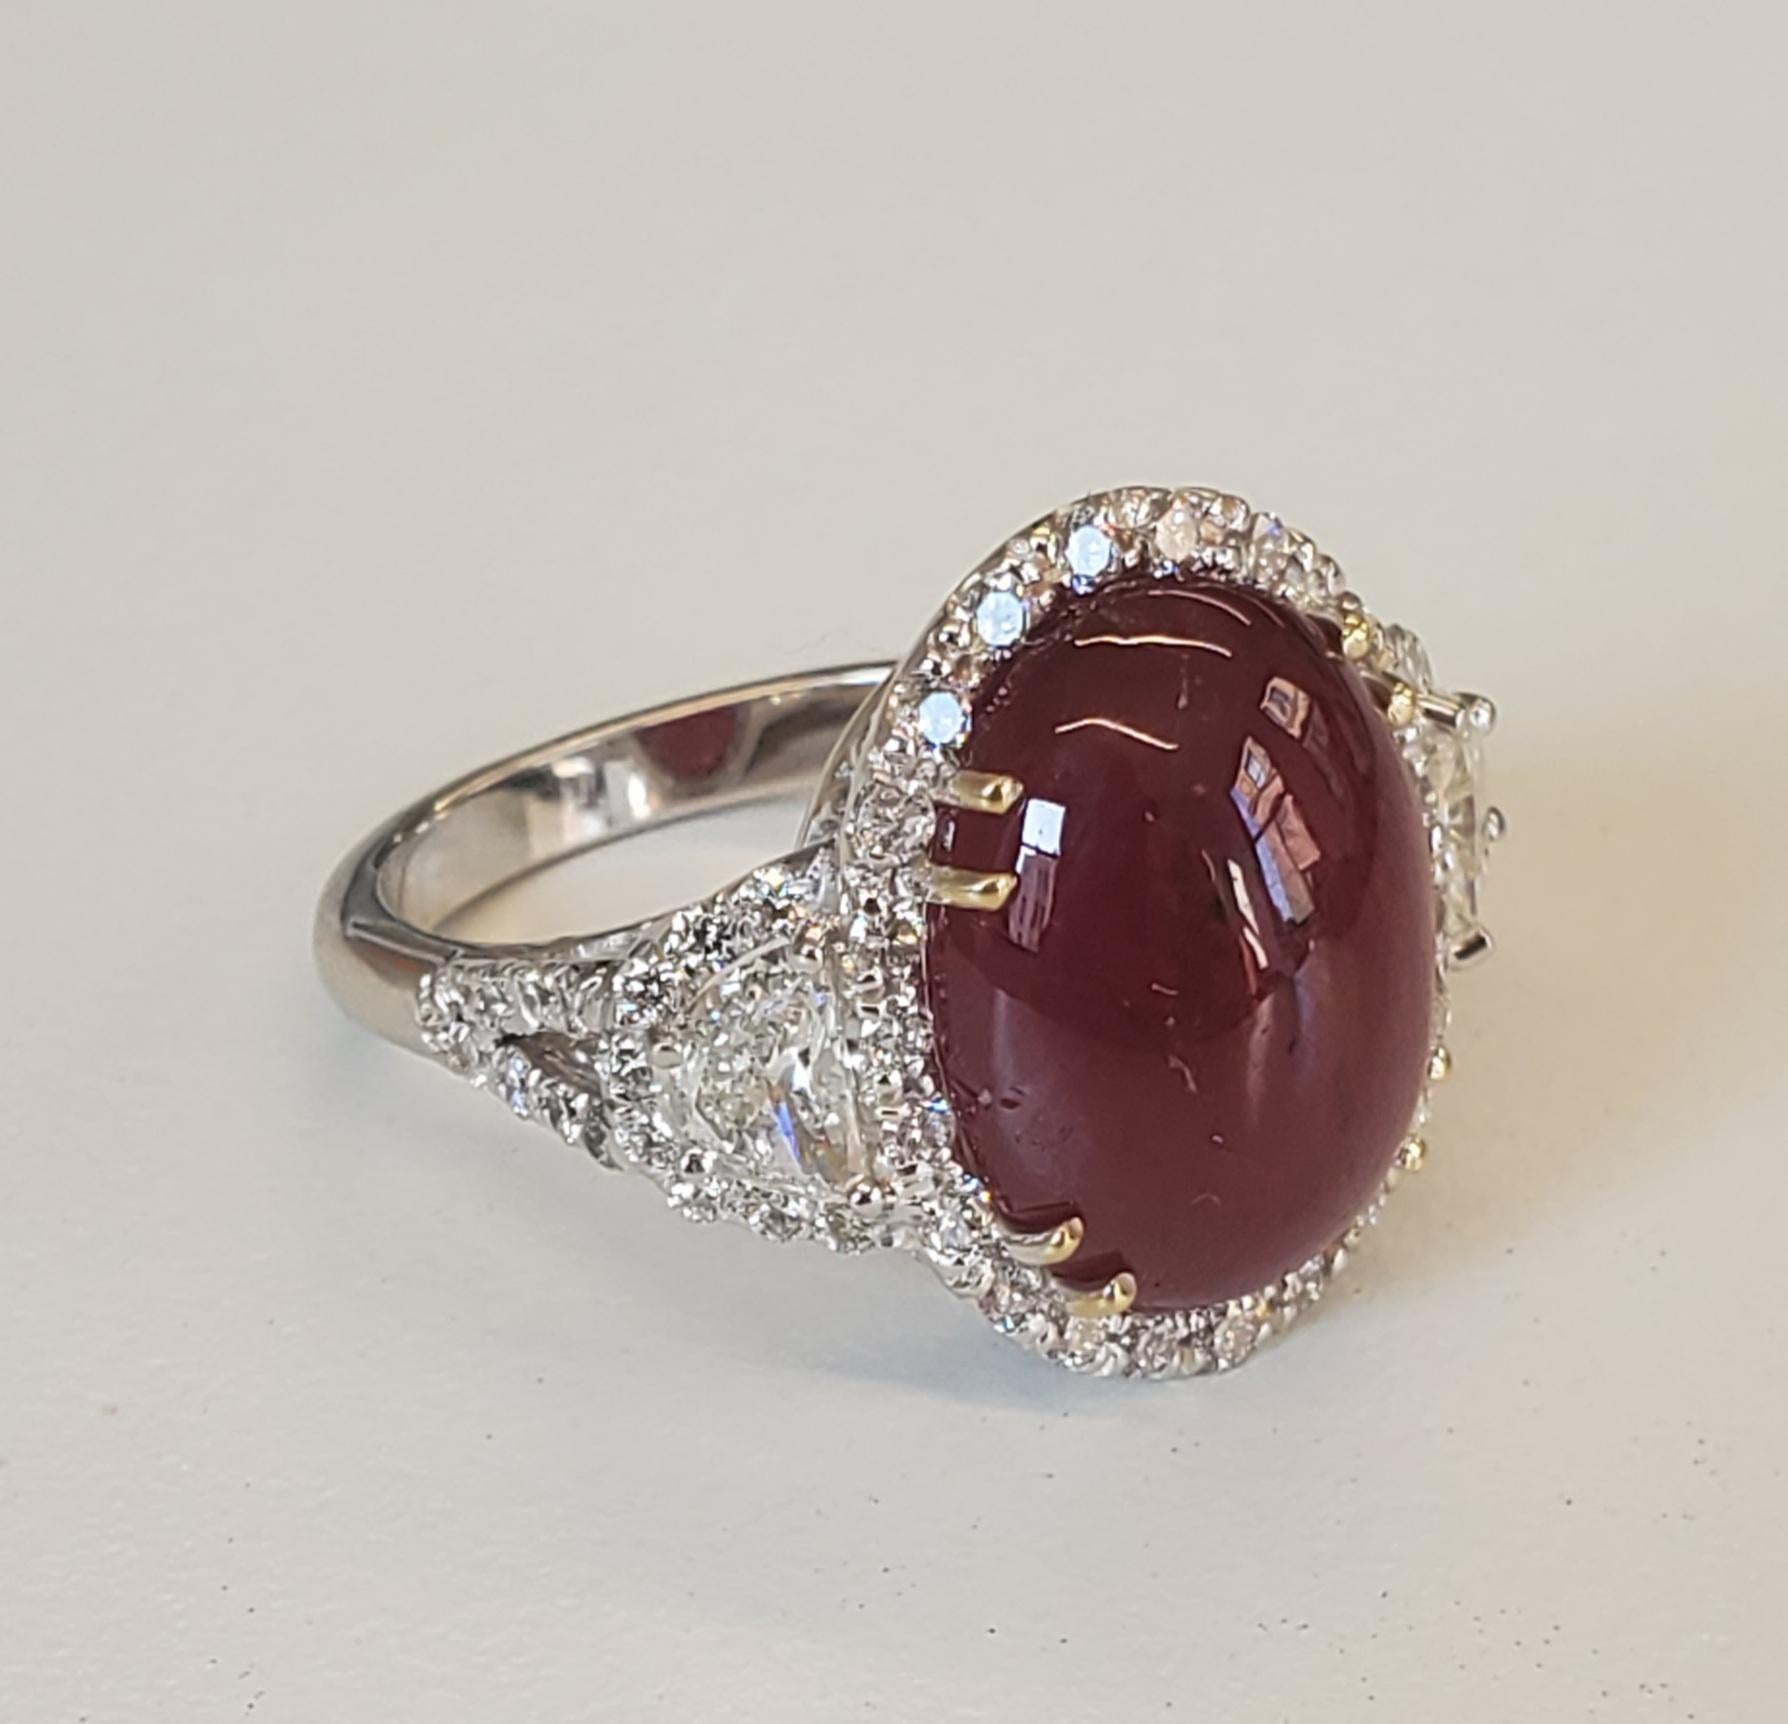 Women's 11.48 Carat Cabochon Oval Ruby & Diamond Ring in 18k White Gold